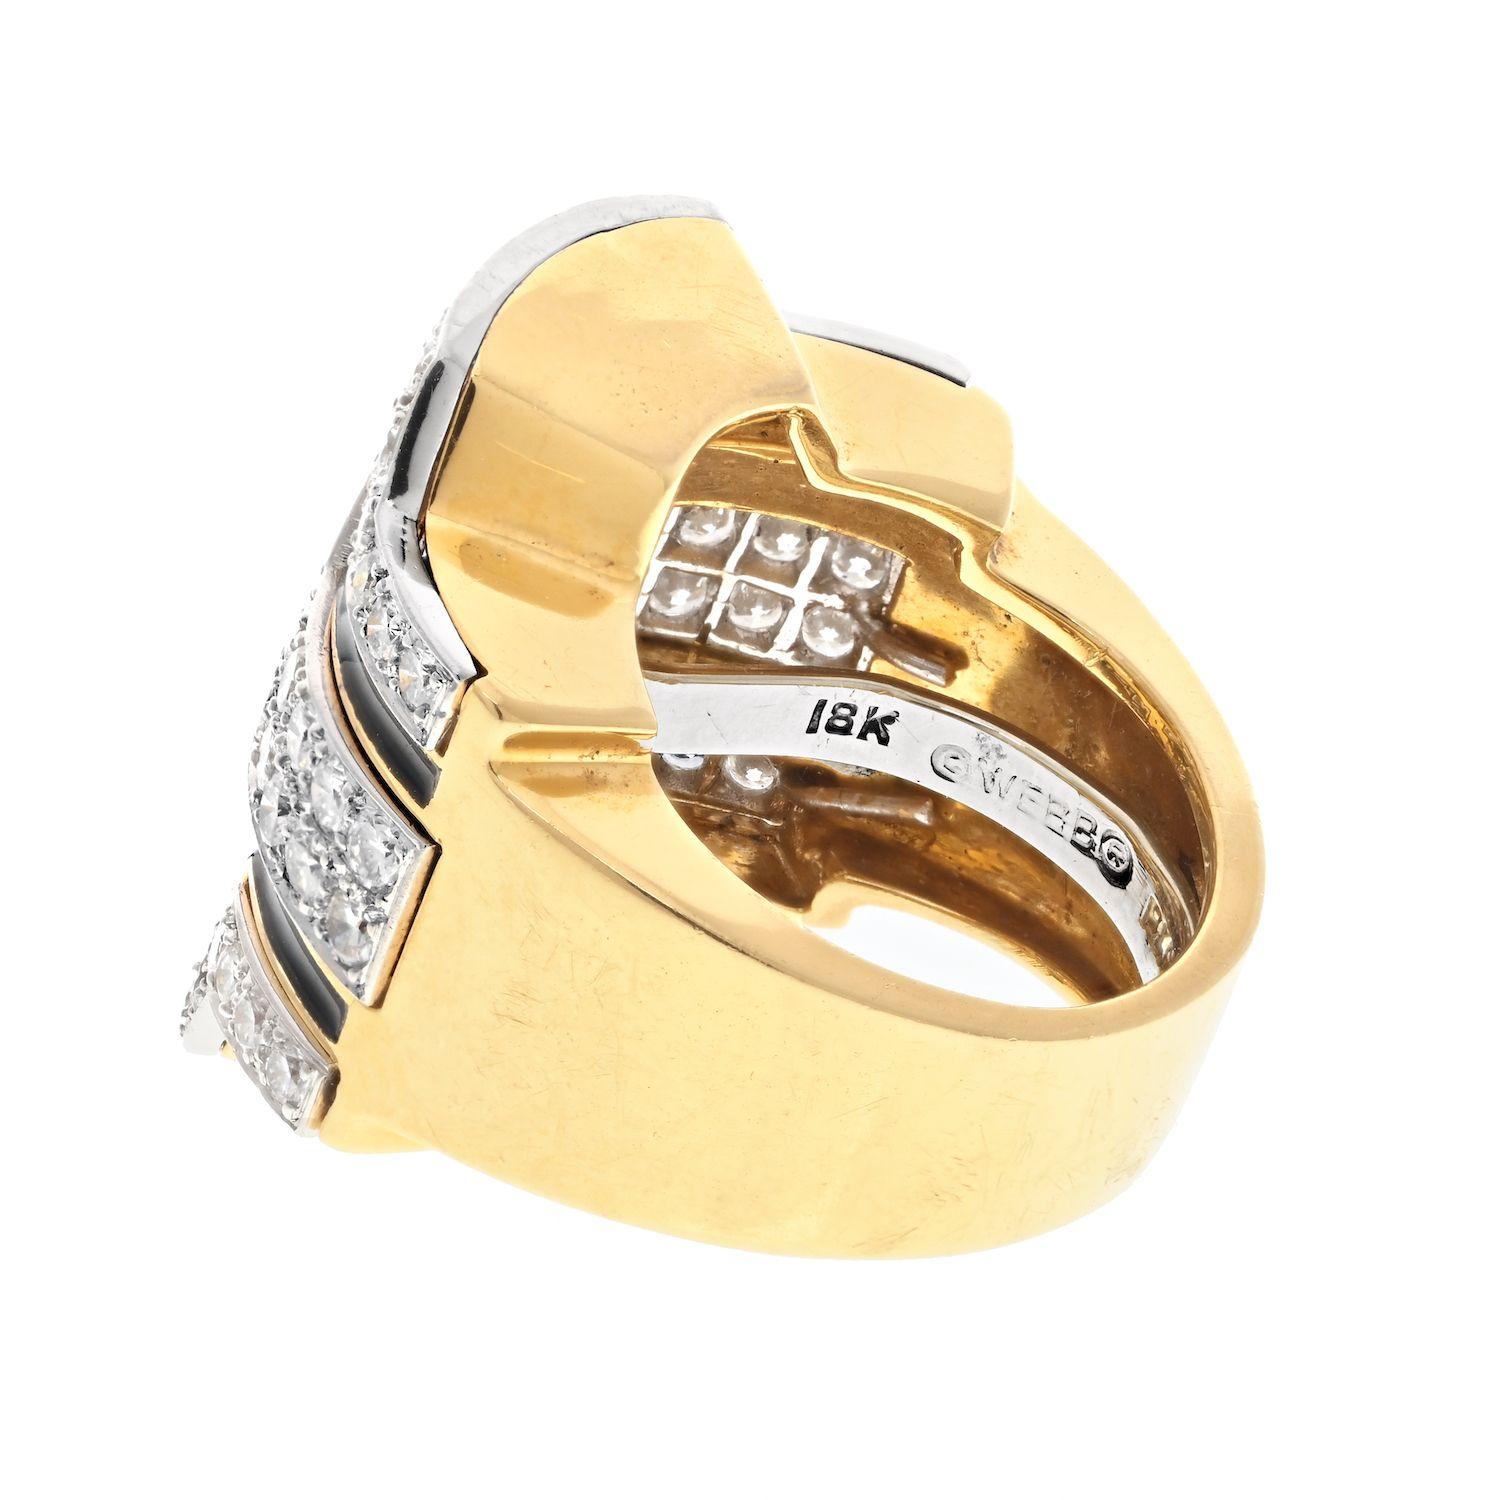 David Webb Platinum & 18k Yellow Gold Black Enamel Diamond Ring In Excellent Condition For Sale In New York, NY